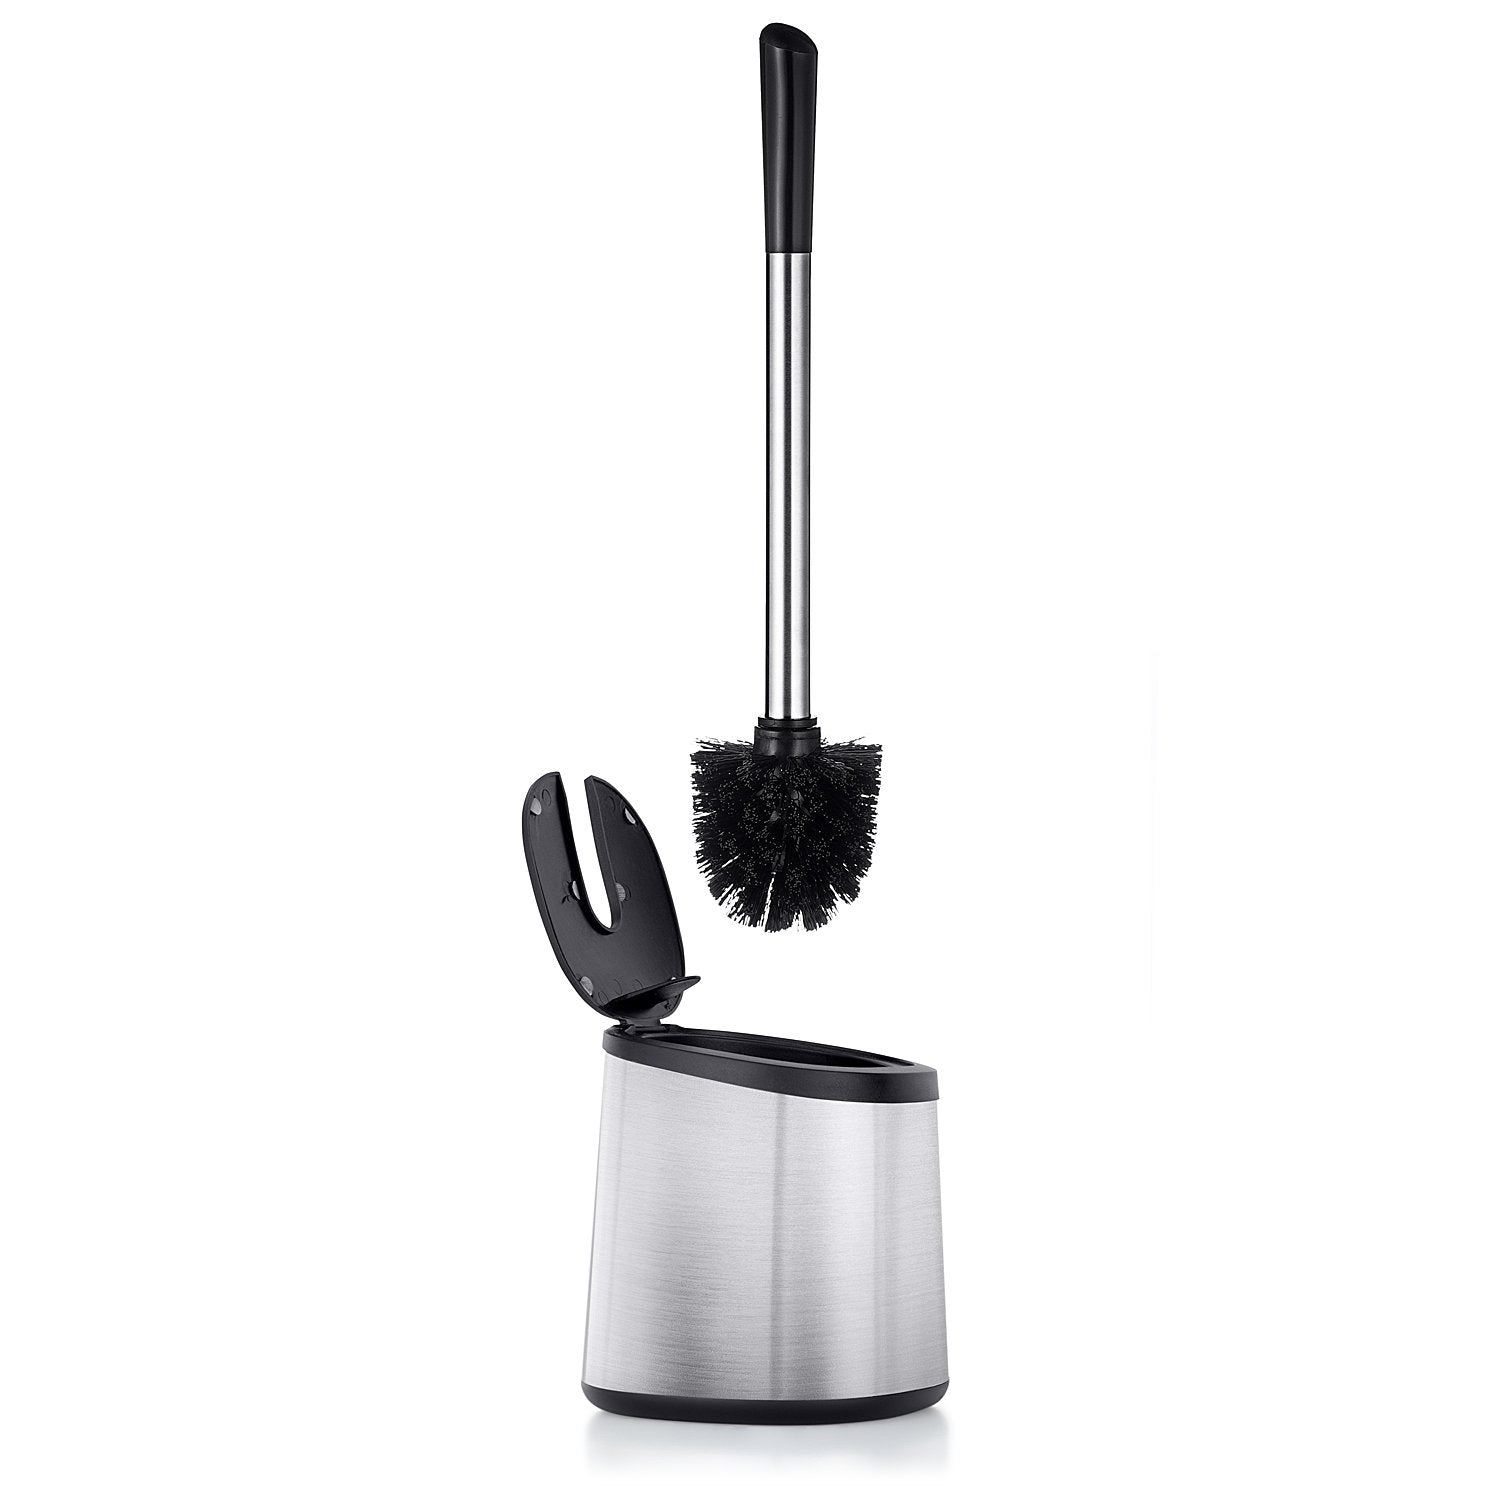 Tatkraft Shy Stainless-Steel Brush, Modern Design with Automatic Closing Lid for Comfort, Rust and Corrosion Proof Premium Quality Toilet Brush, Sturdy and Flexible Brush Fibers